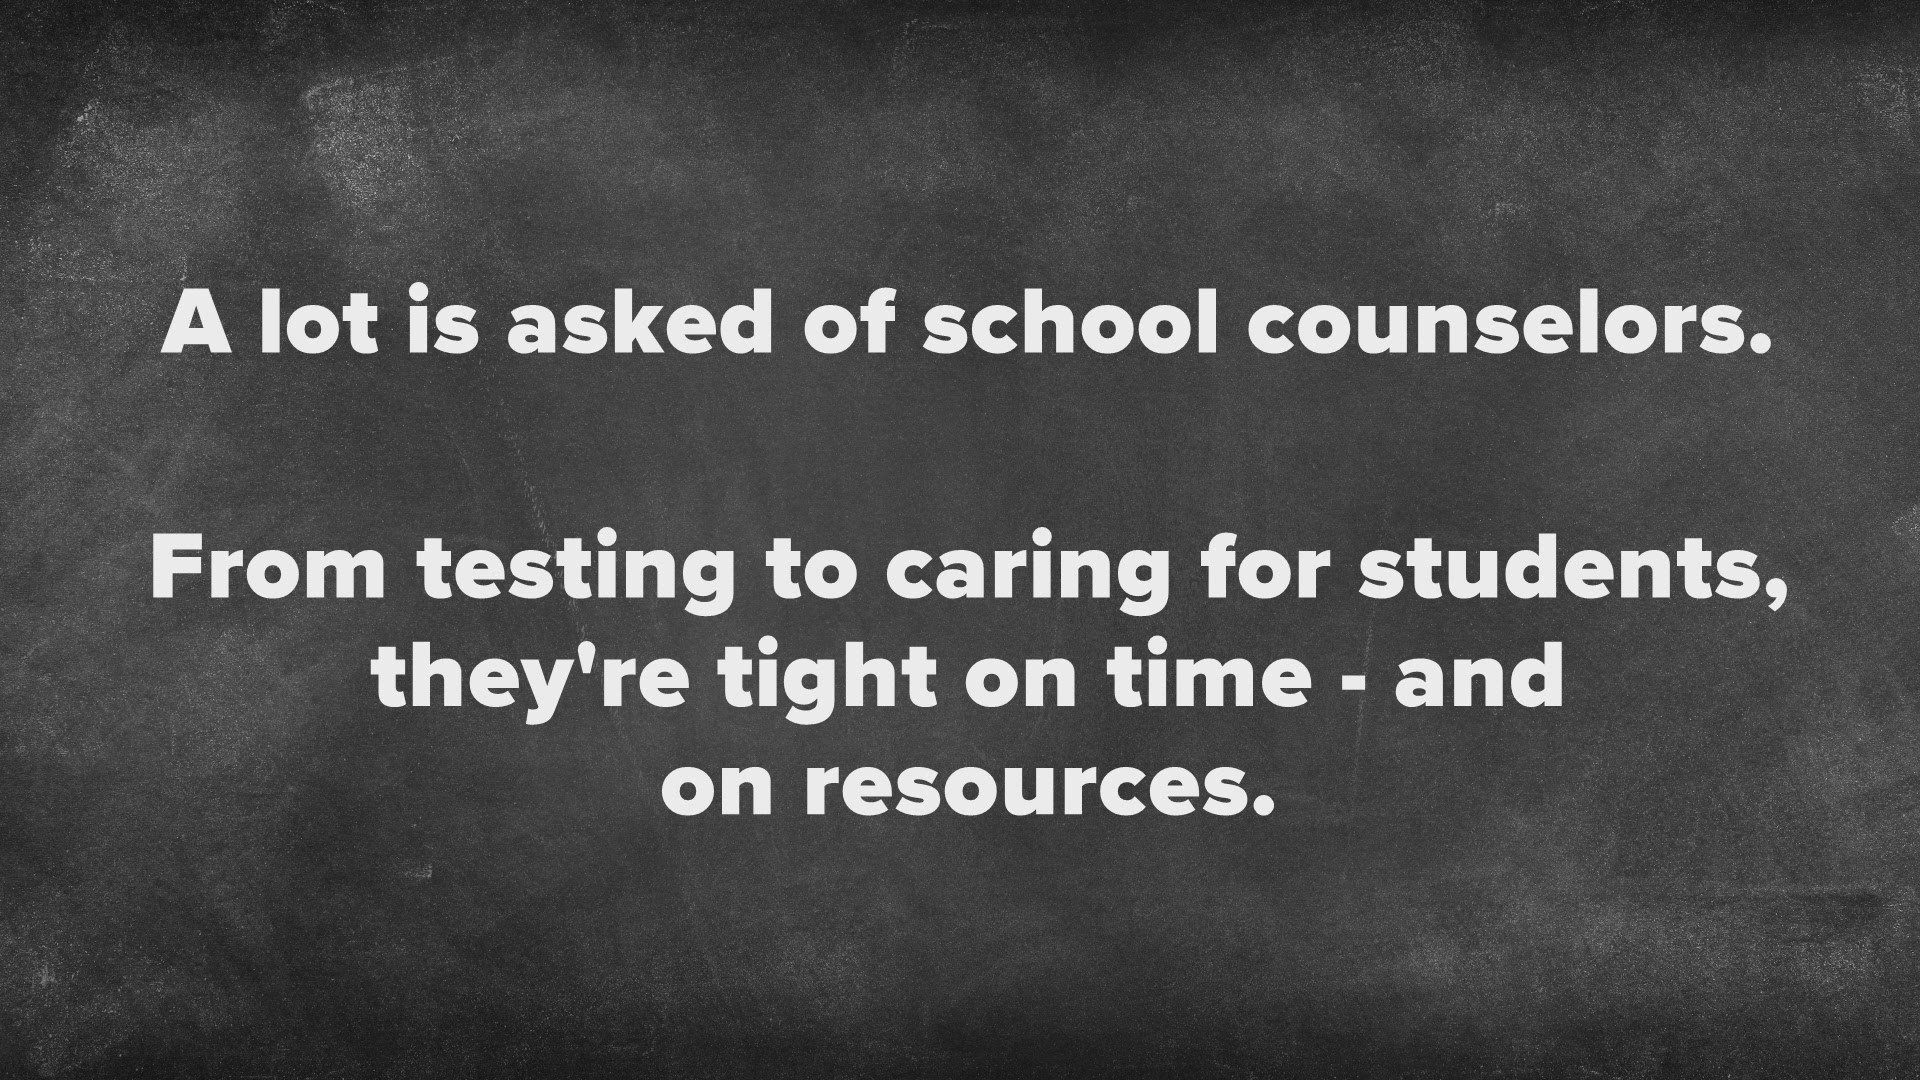 School counselors are stretched too thin and are asked to handle too many tasks. We asked local counselors to sound off on the struggles they face.